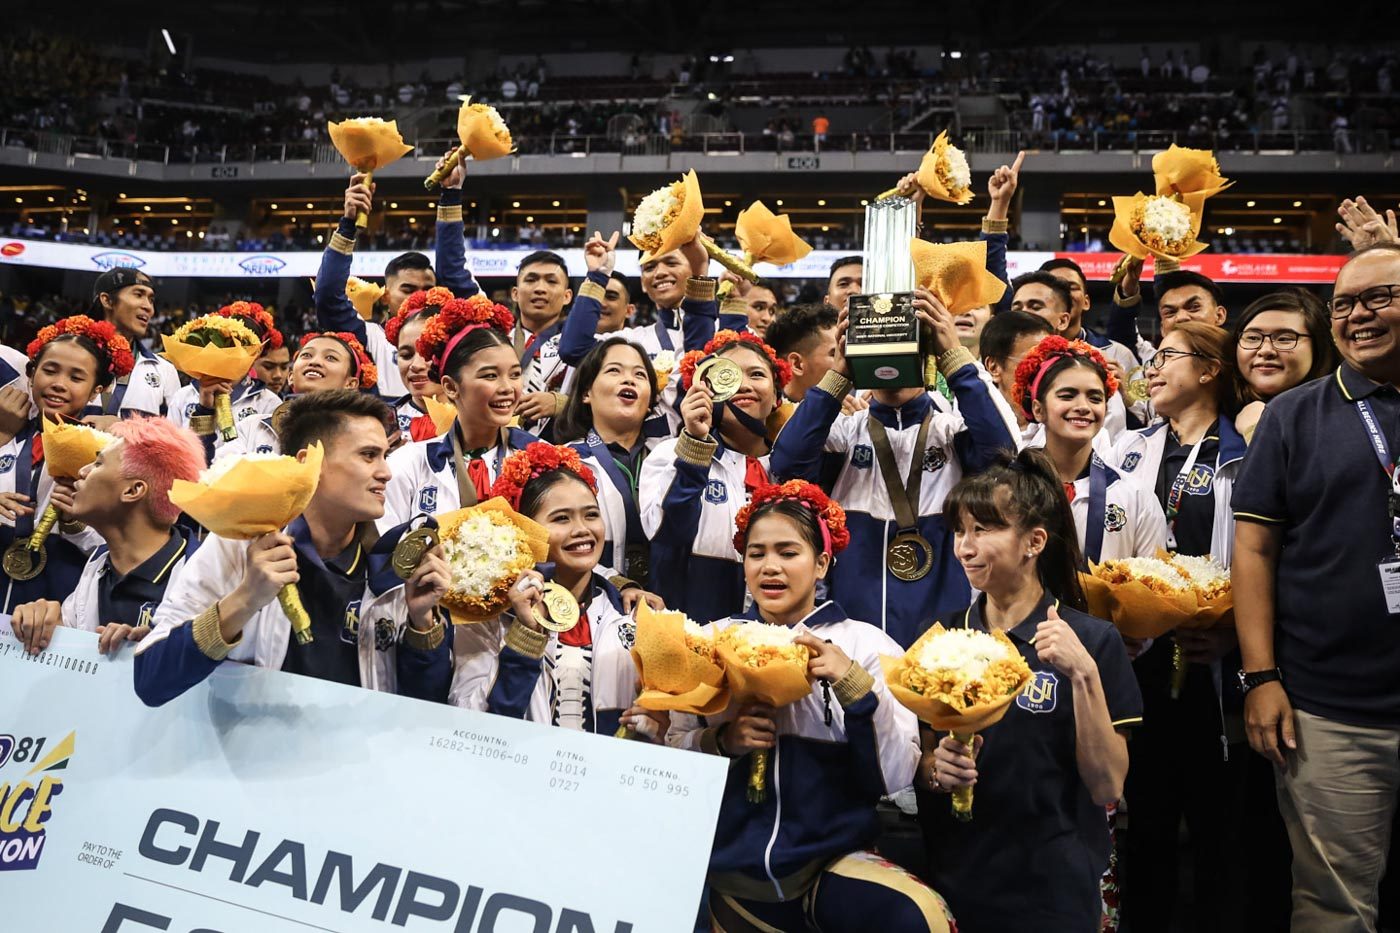 Why the lower UAAP cheerdance prize?